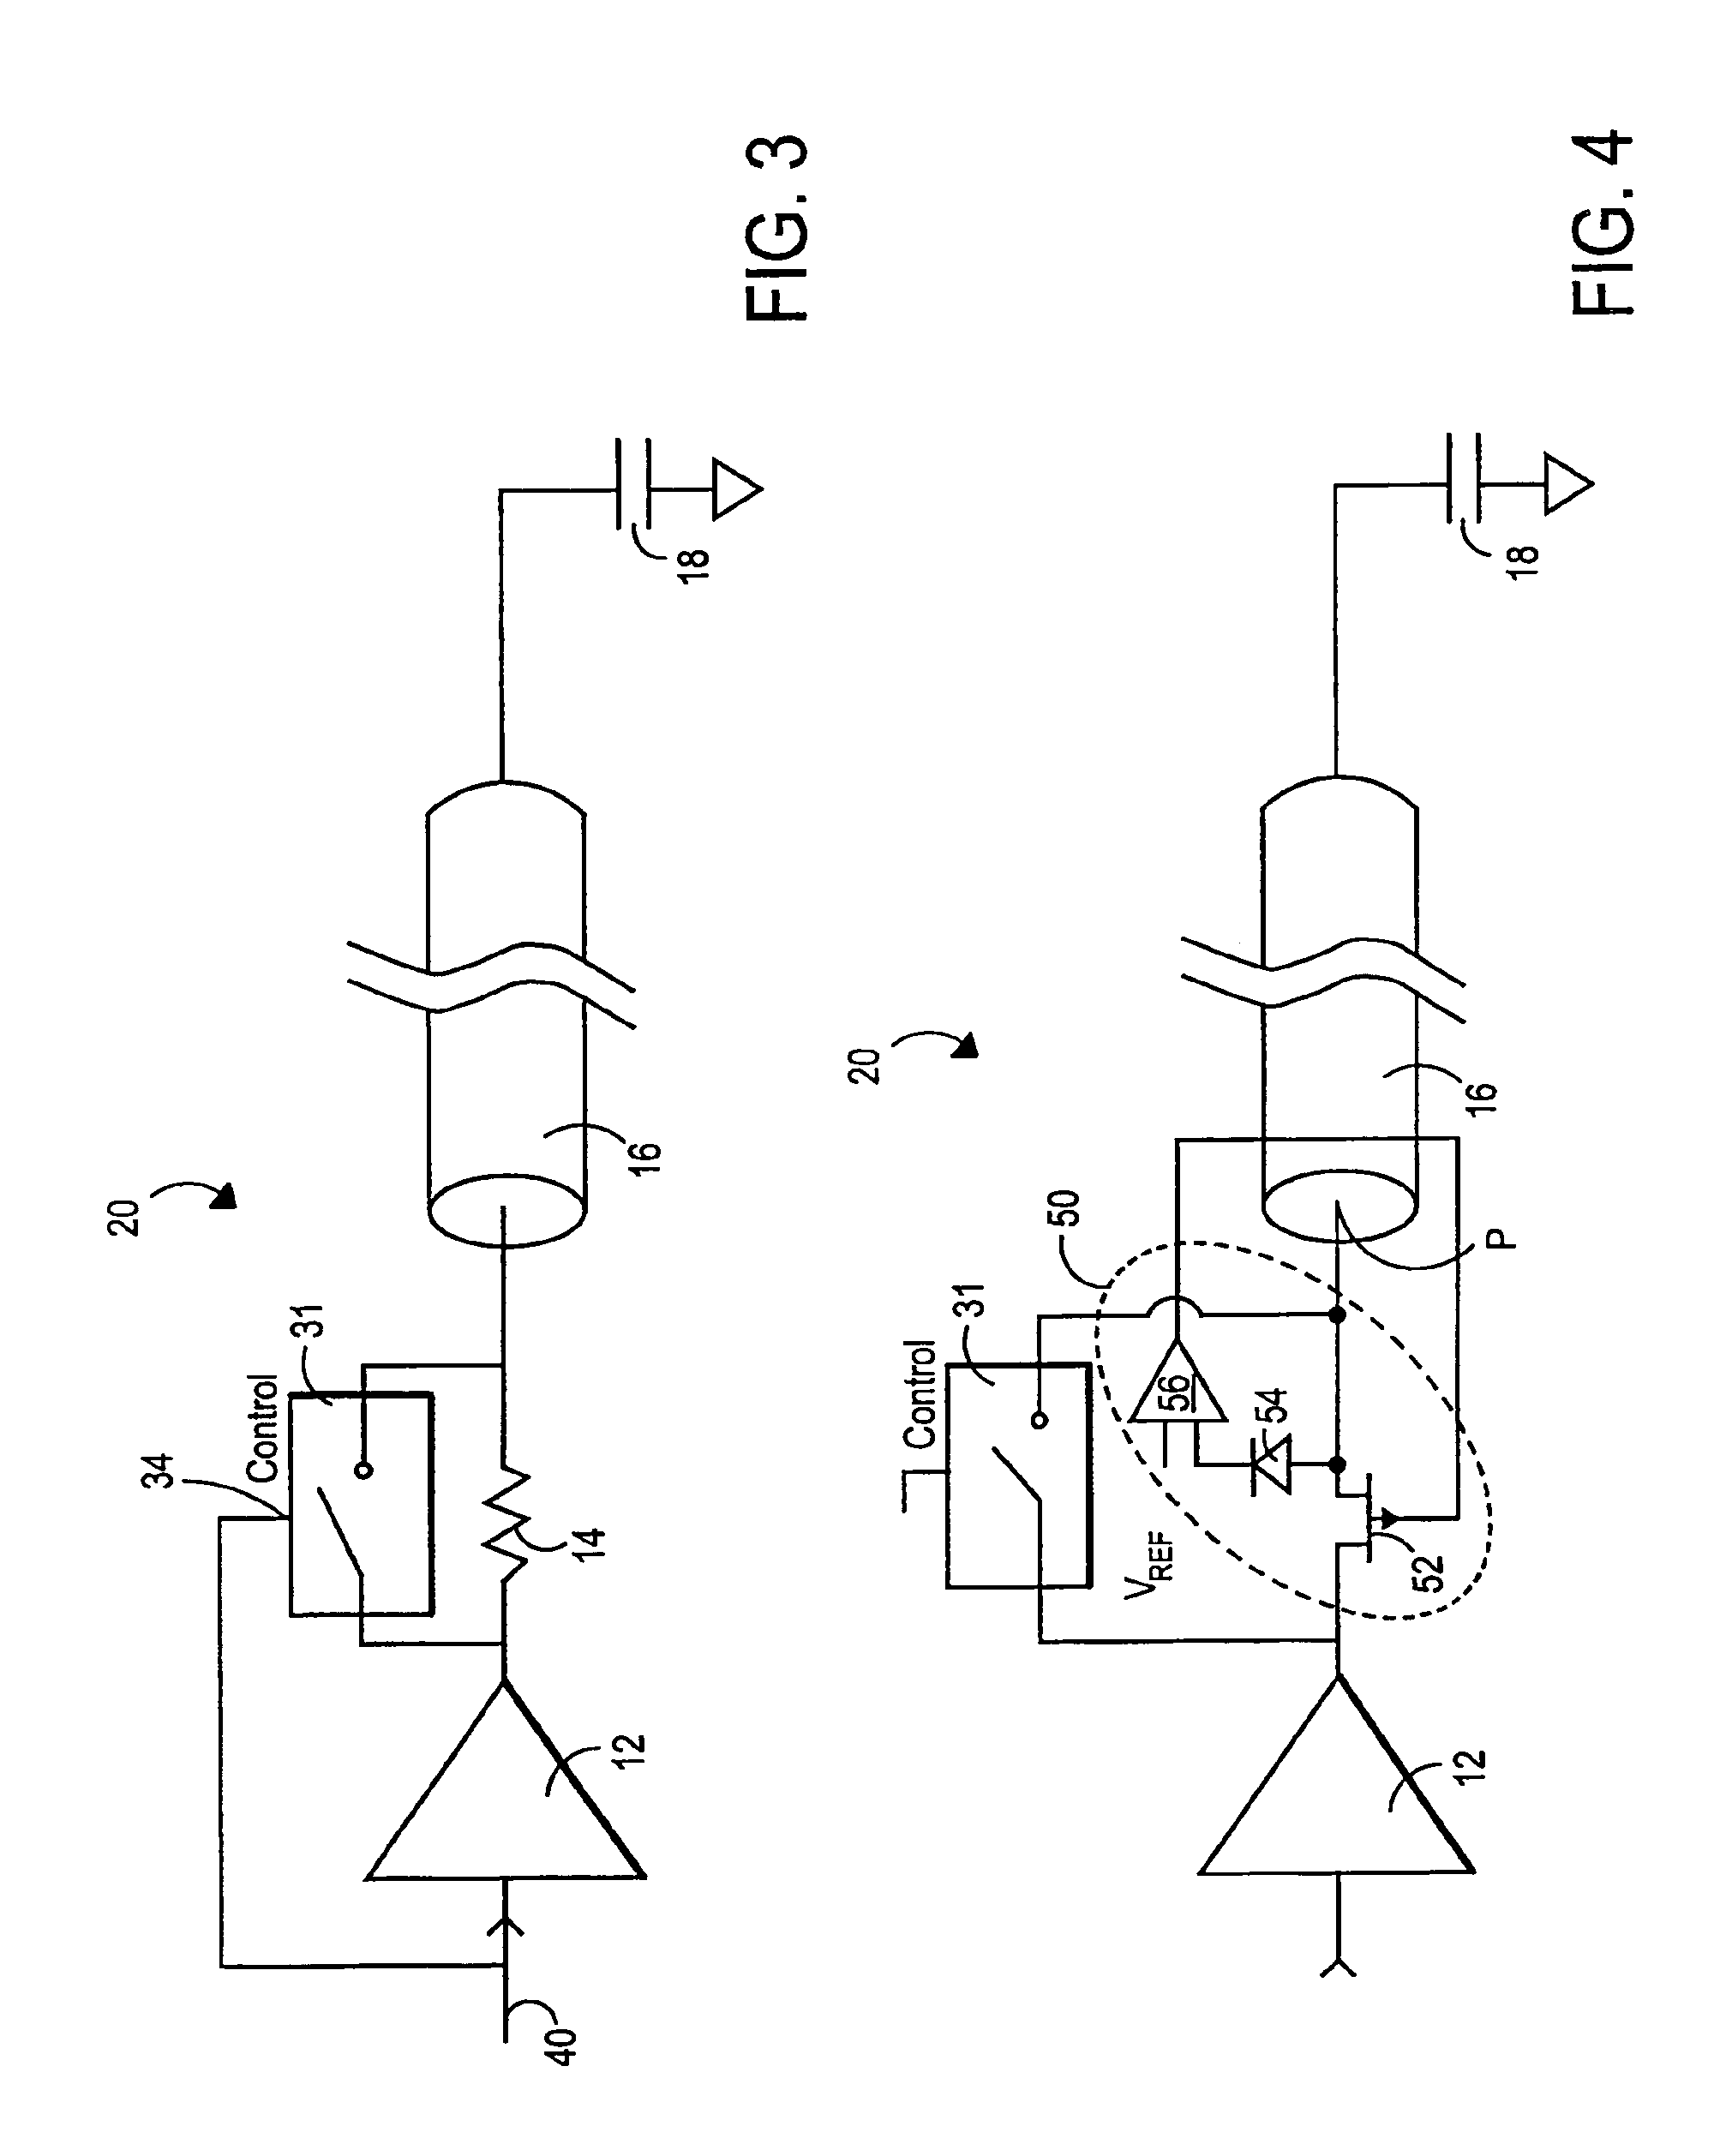 Reflection-control system and method